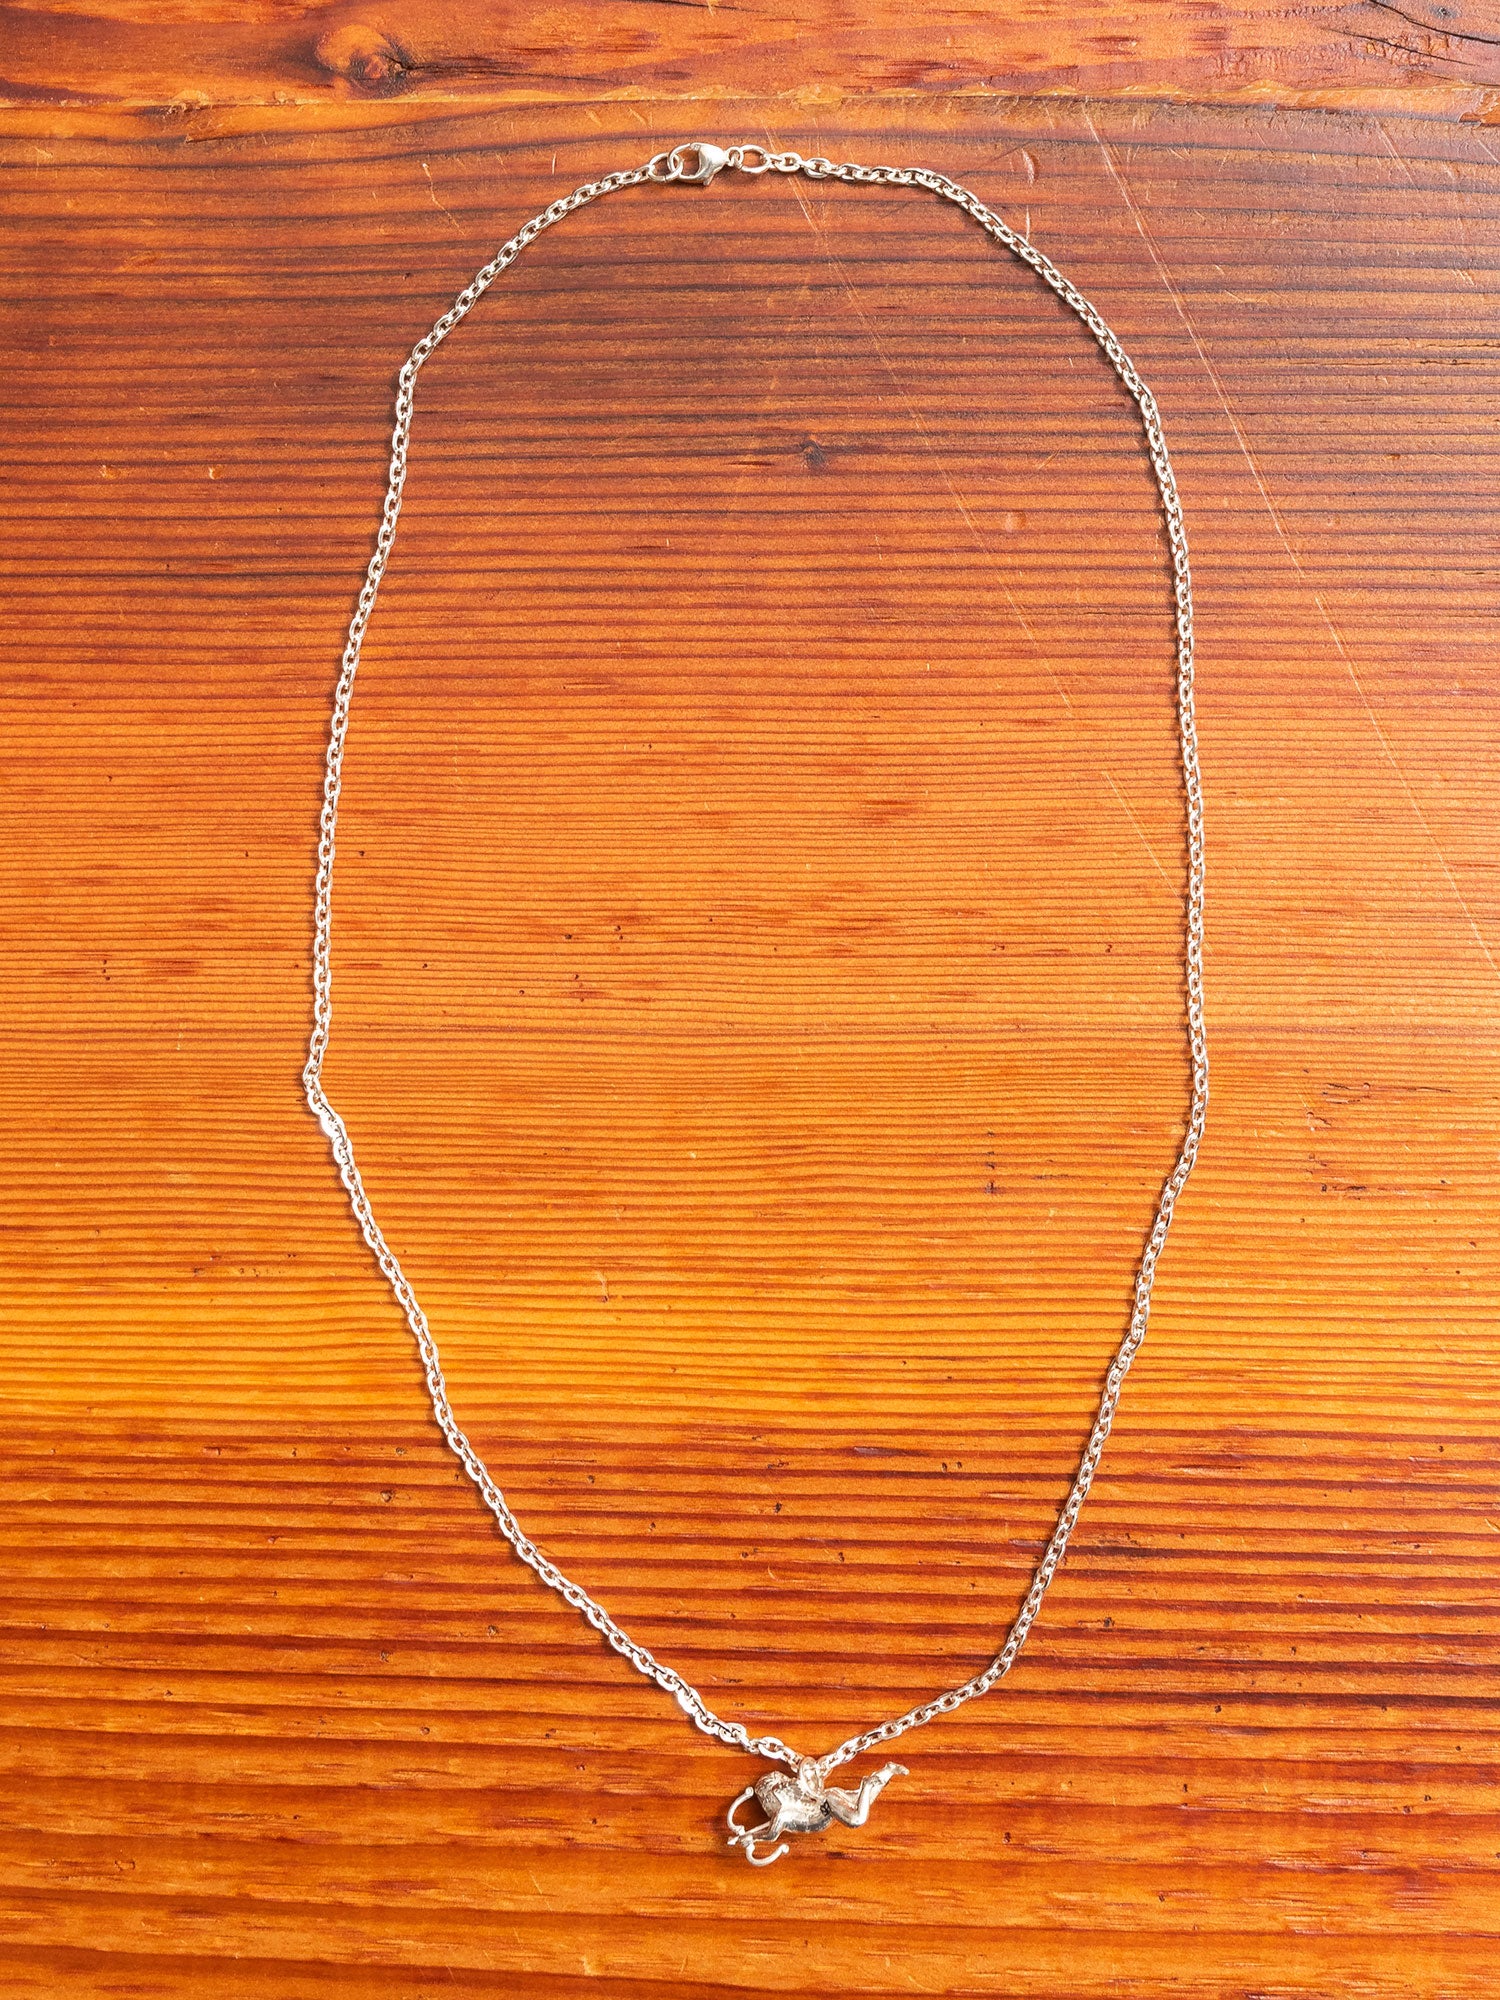 Maple x Elhaus "Lover Chain" Necklace in Silver